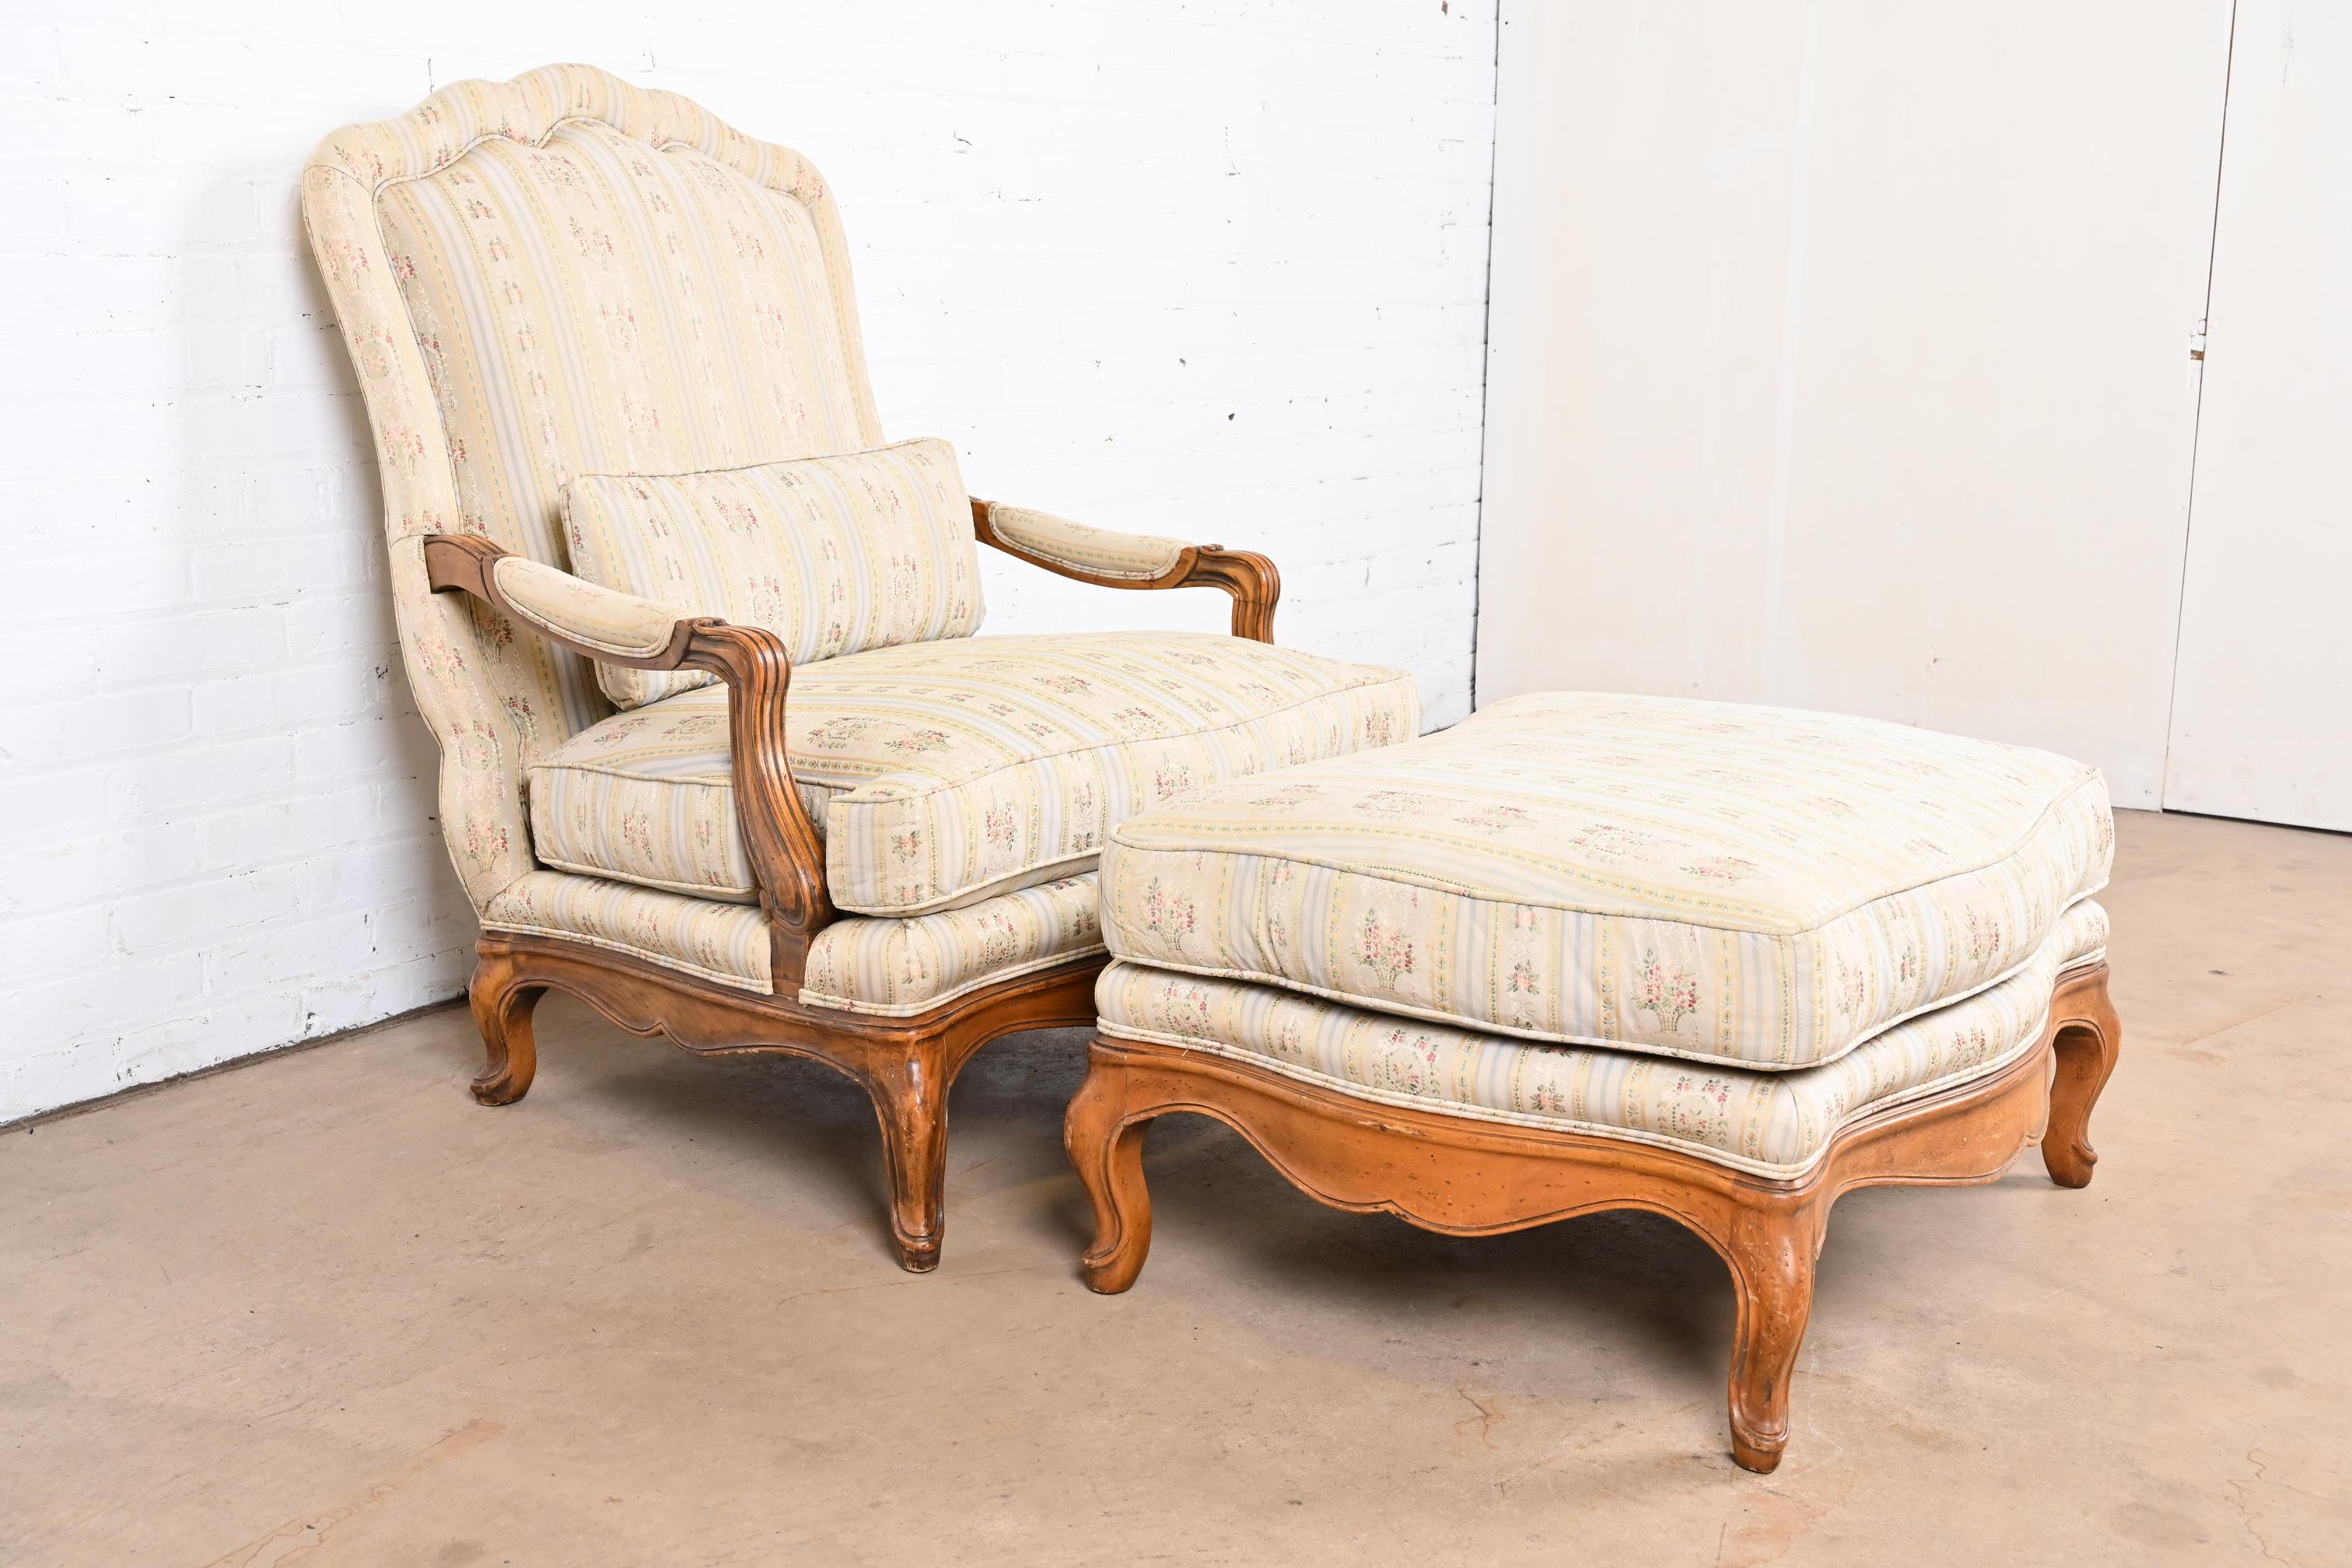 A gorgeous French Provincial Louis XV style upholstered lounge chair with ottoman

By Baker Furniture

USA, Circa 1960s

Carved walnut frame, with floral patterned upholstery.

Measures:
Chair - 35.5